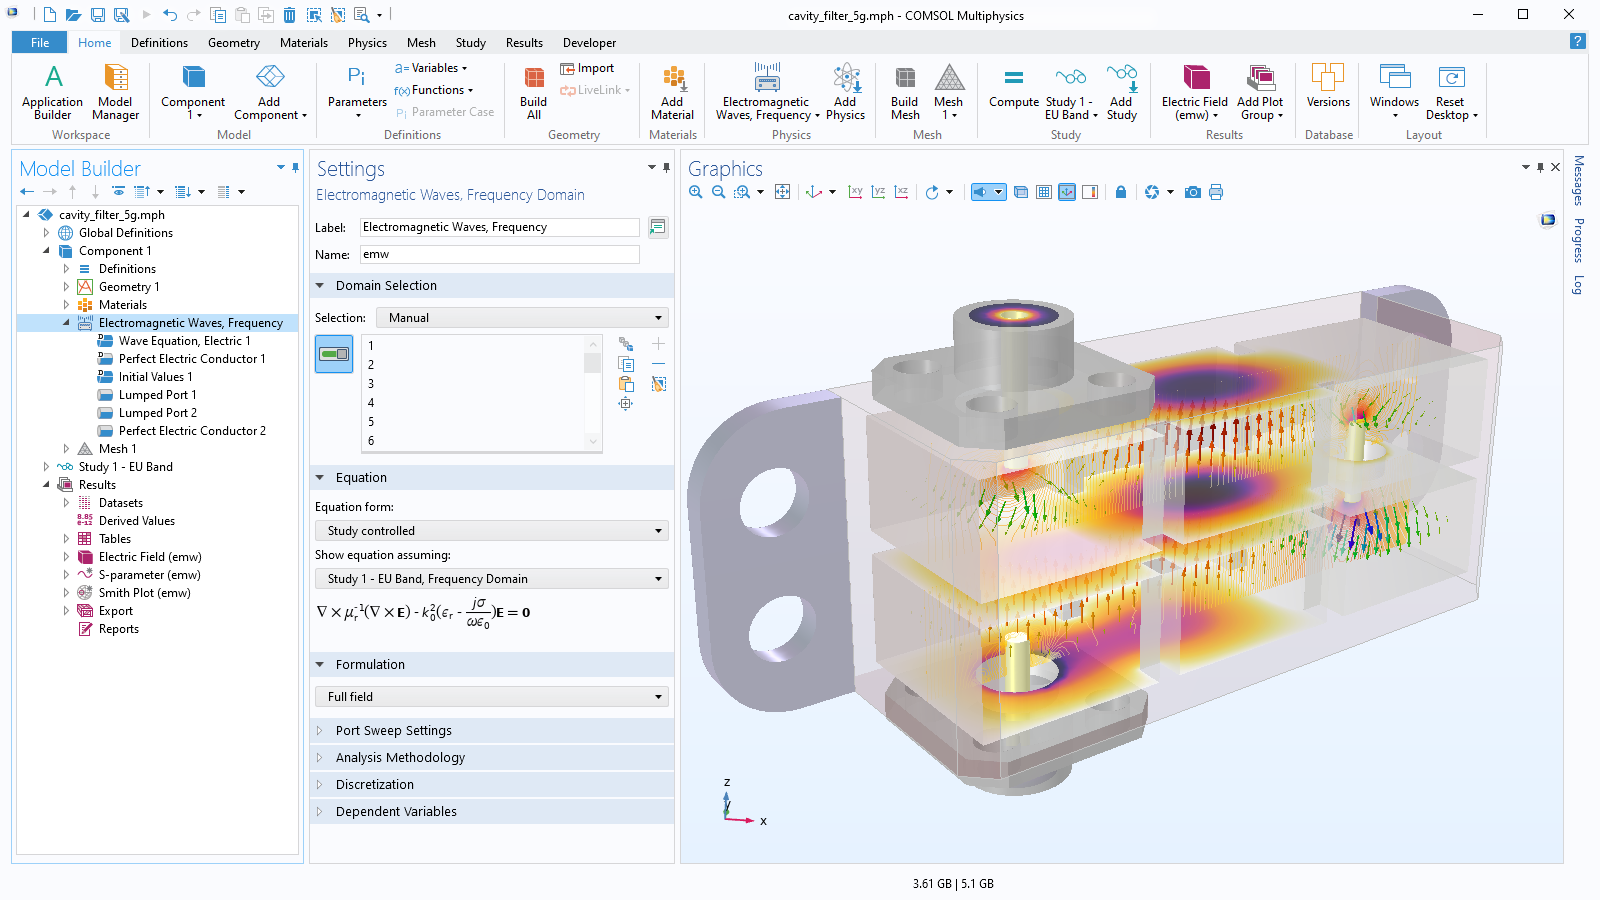 The COMSOL Multiphysics UI showing the Model Builder with the Electromagnetic Waves, Frequency Domain node highlighted, the corresponding Settings window, and a cavity filter model in the Graphics window.